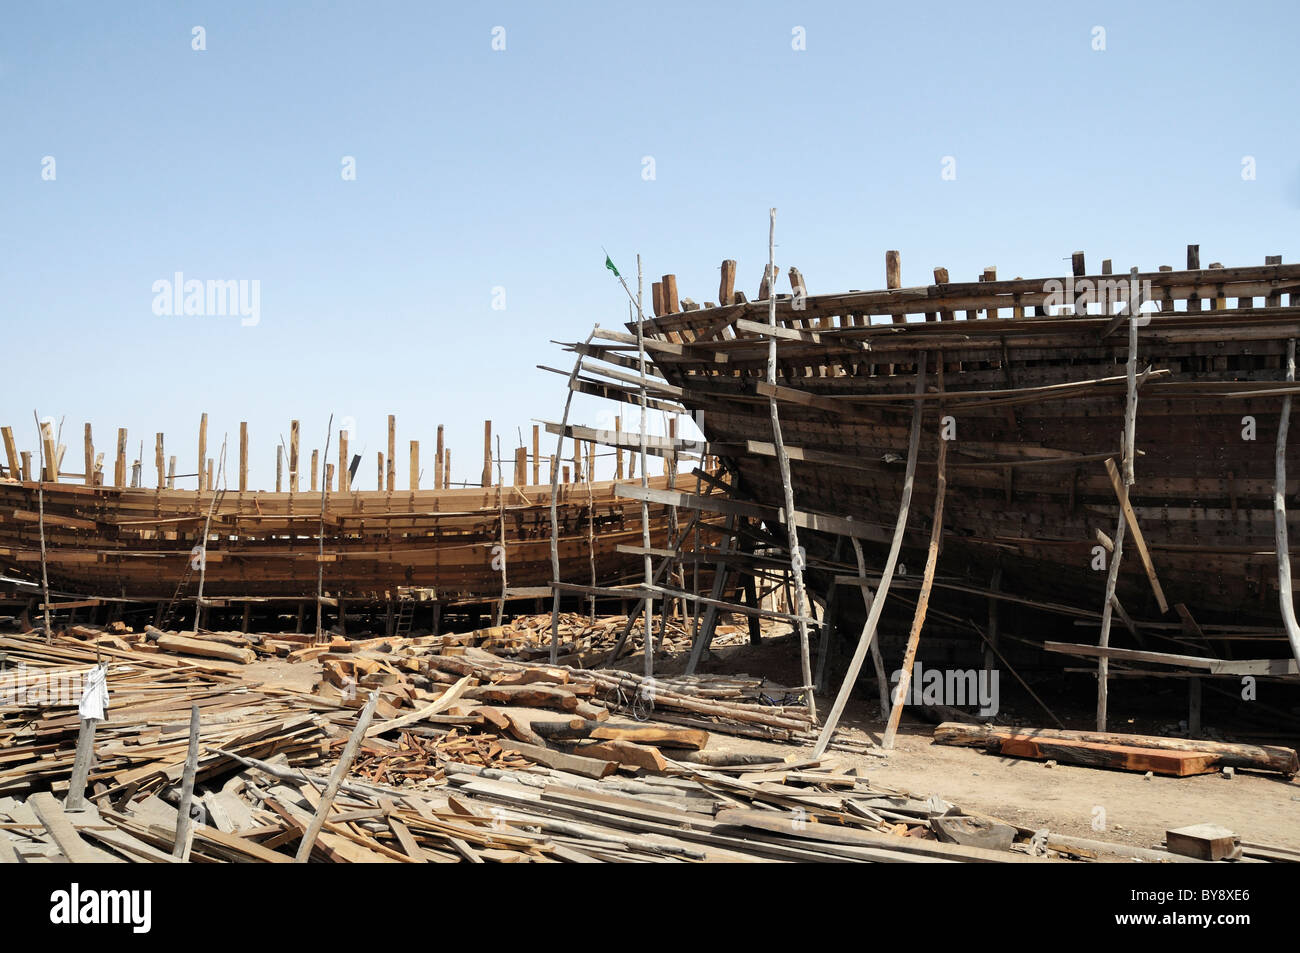 Traditional shipbuilding in Mandvi (Kutch, India). The ships here are still built using traditional methods. Stock Photo